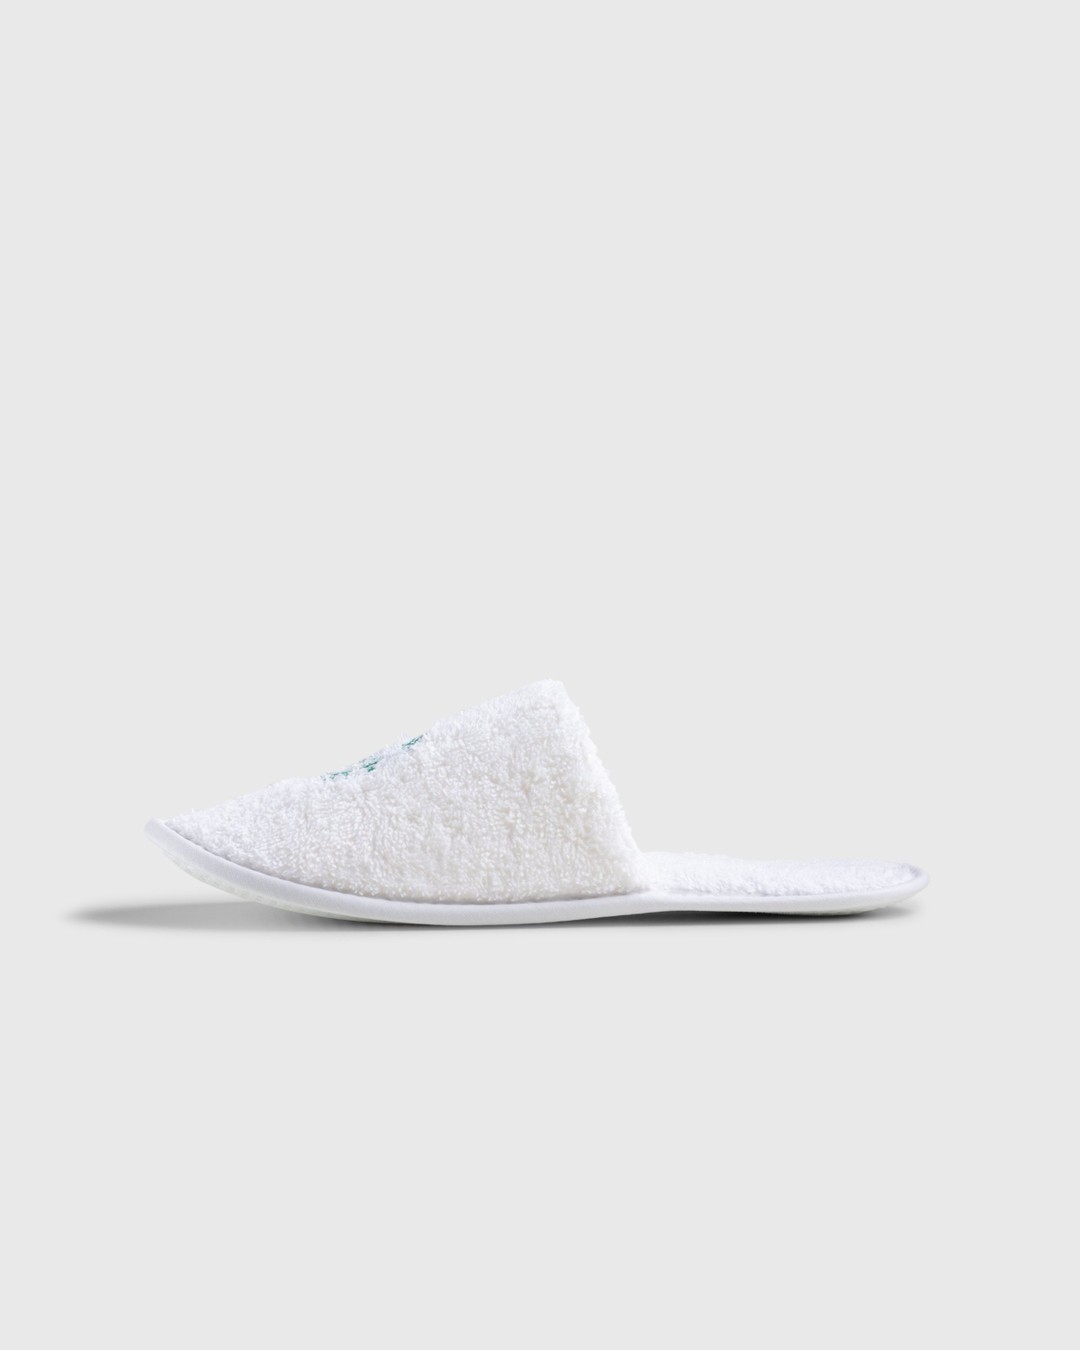 Hotel Amour x Highsnobiety – Not In Paris 4 Slippers White - Slippers - White - Image 3